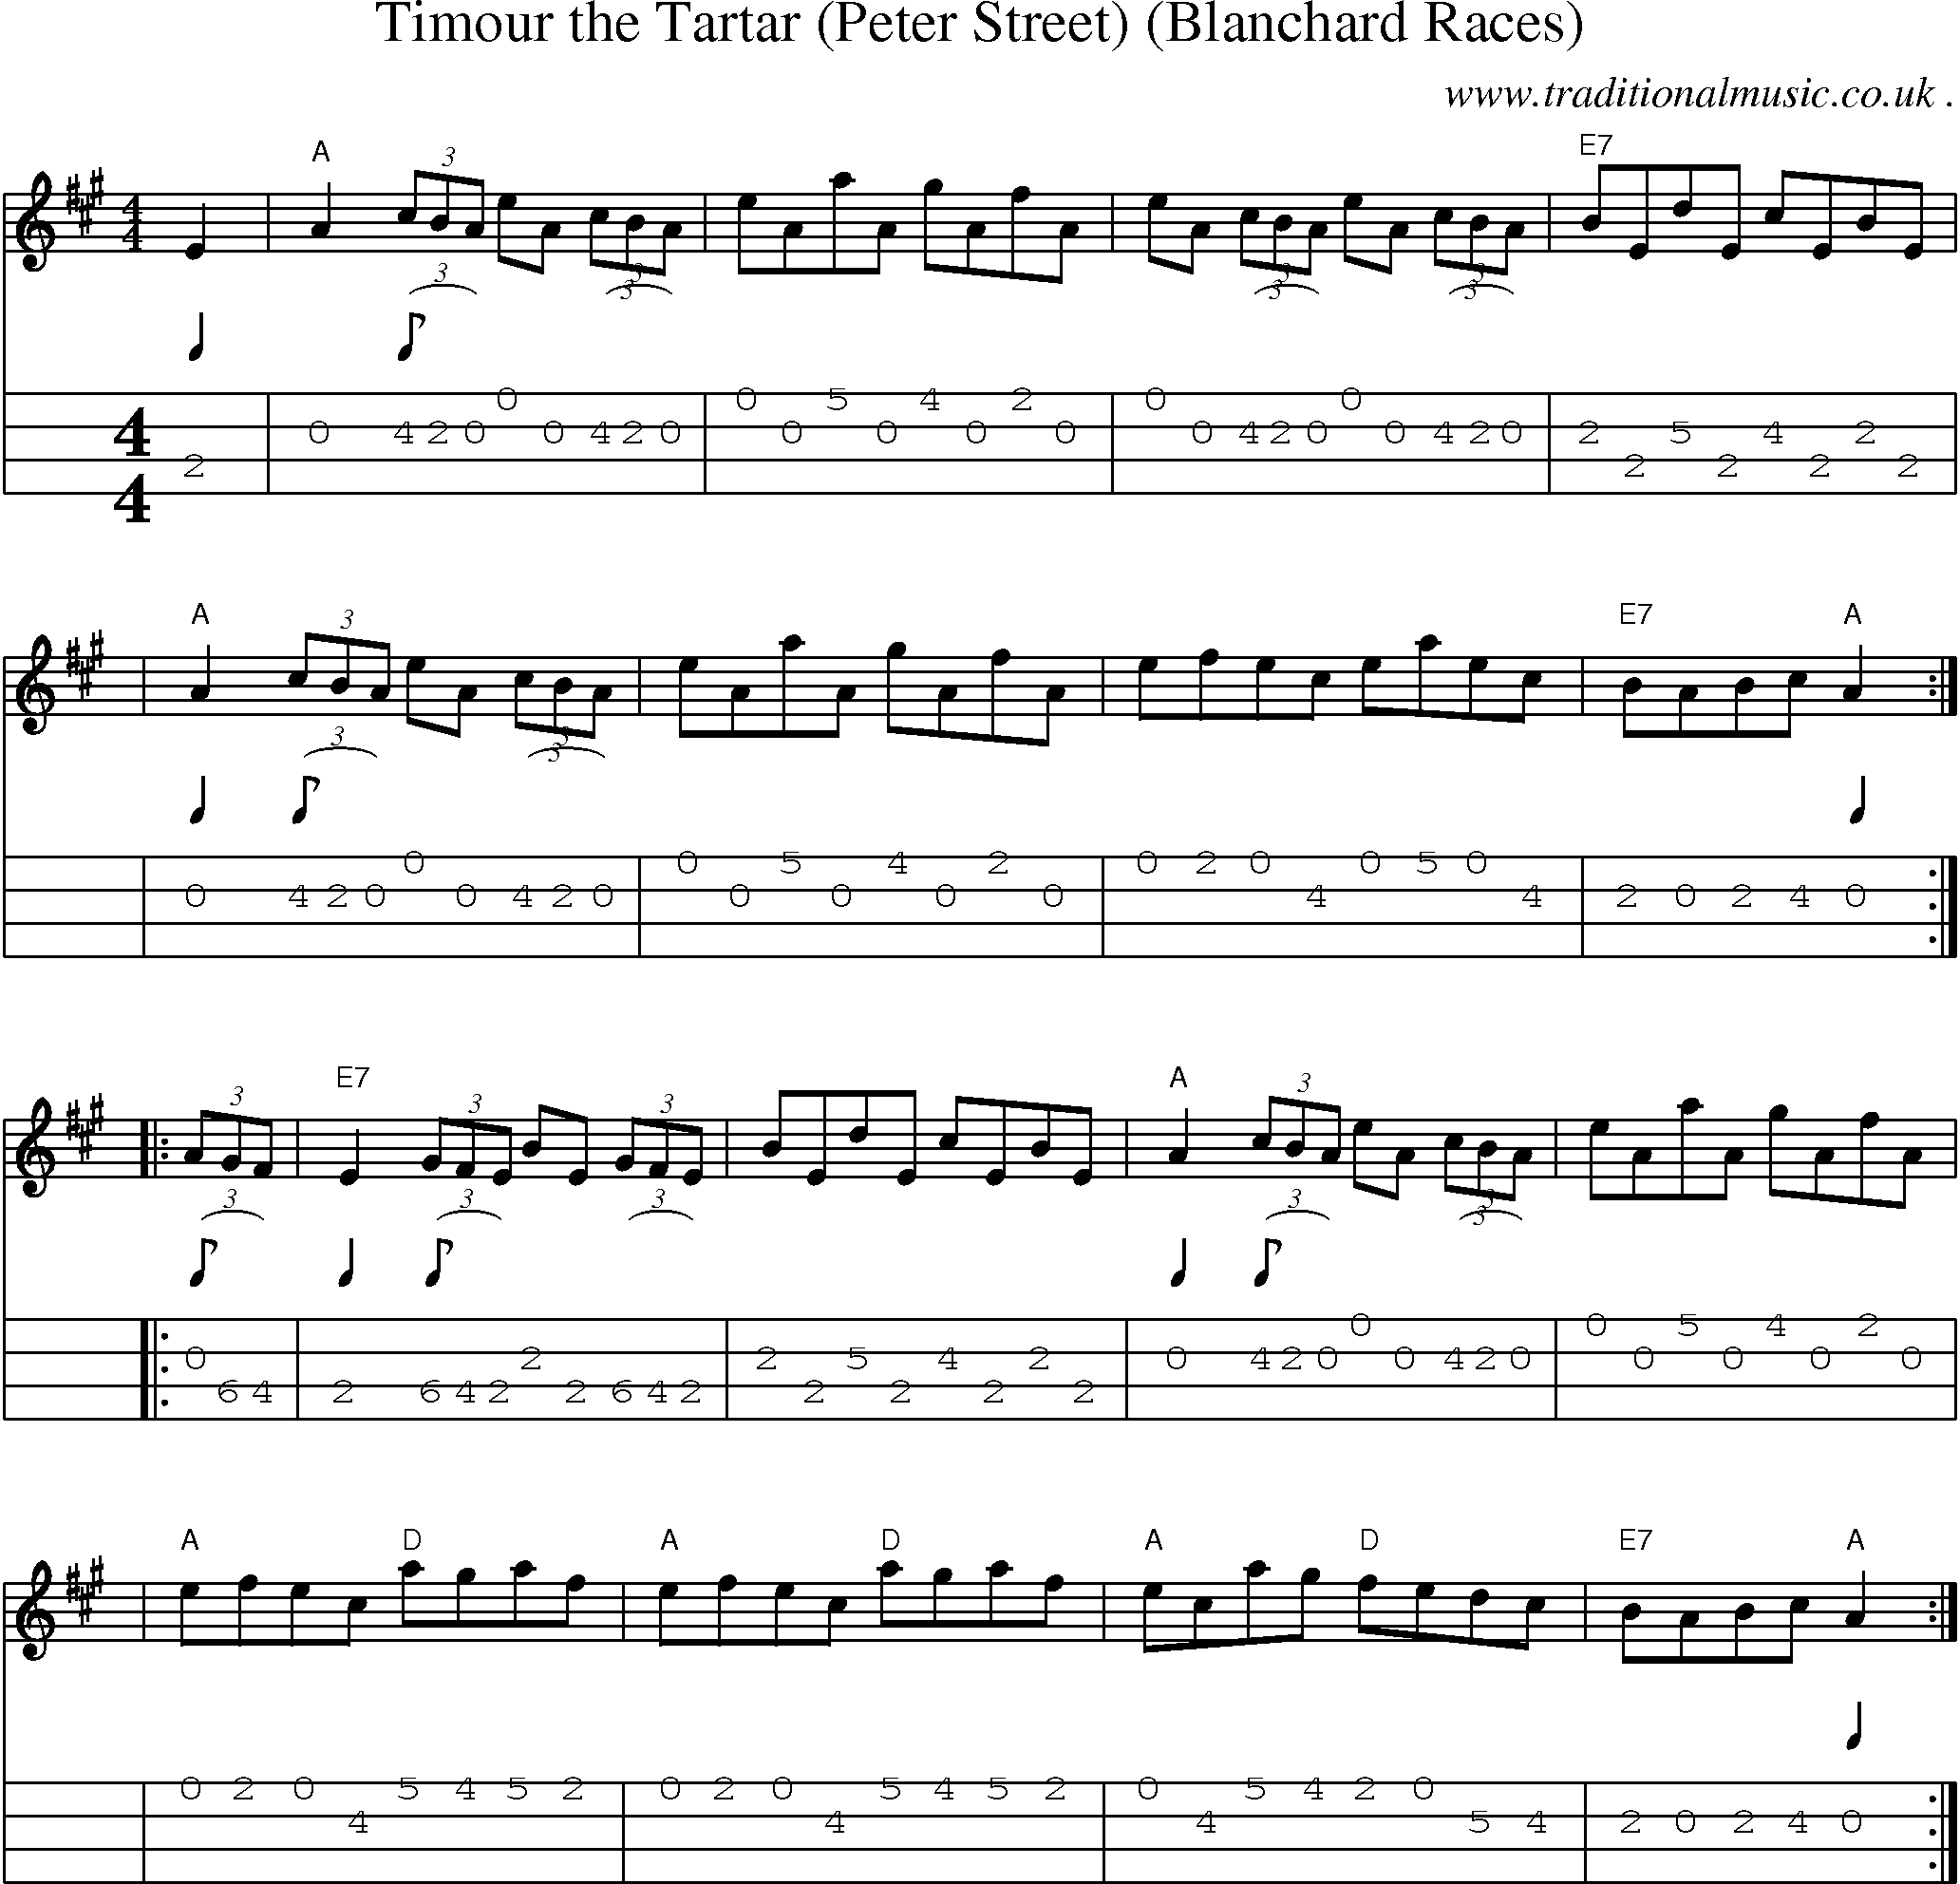 Sheet-music  score, Chords and Mandolin Tabs for Timour The Tartar Peter Street Blanchard Races